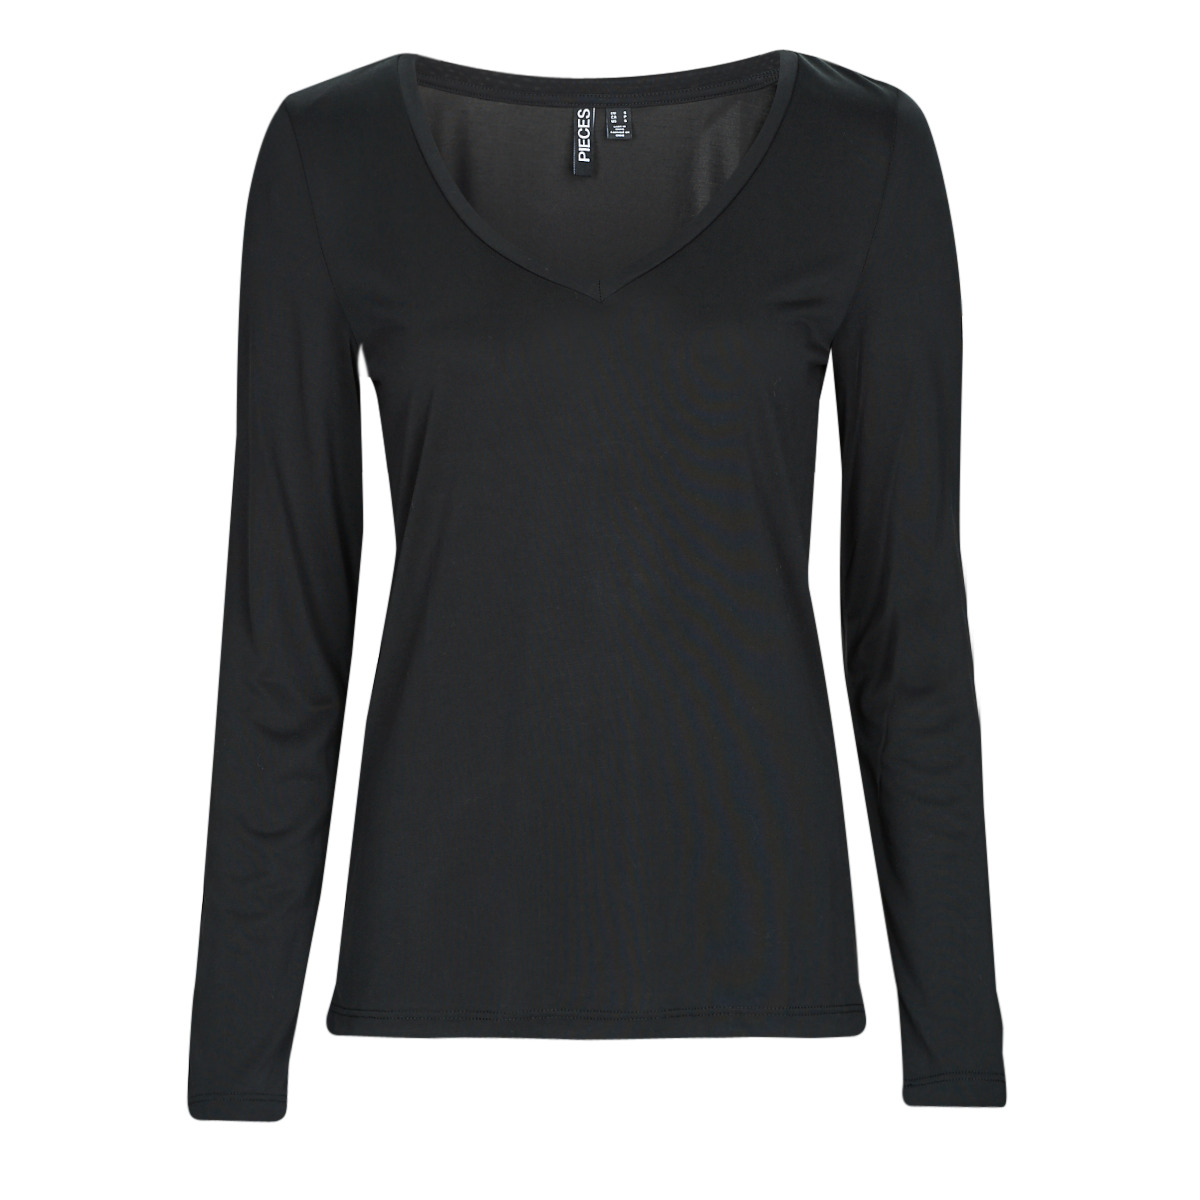 delivery NET LS Spartoo NEW NOOS shirts ! TOP - Pieces Black sleeved Women Long BC - PCKAMALA Free | Clothing